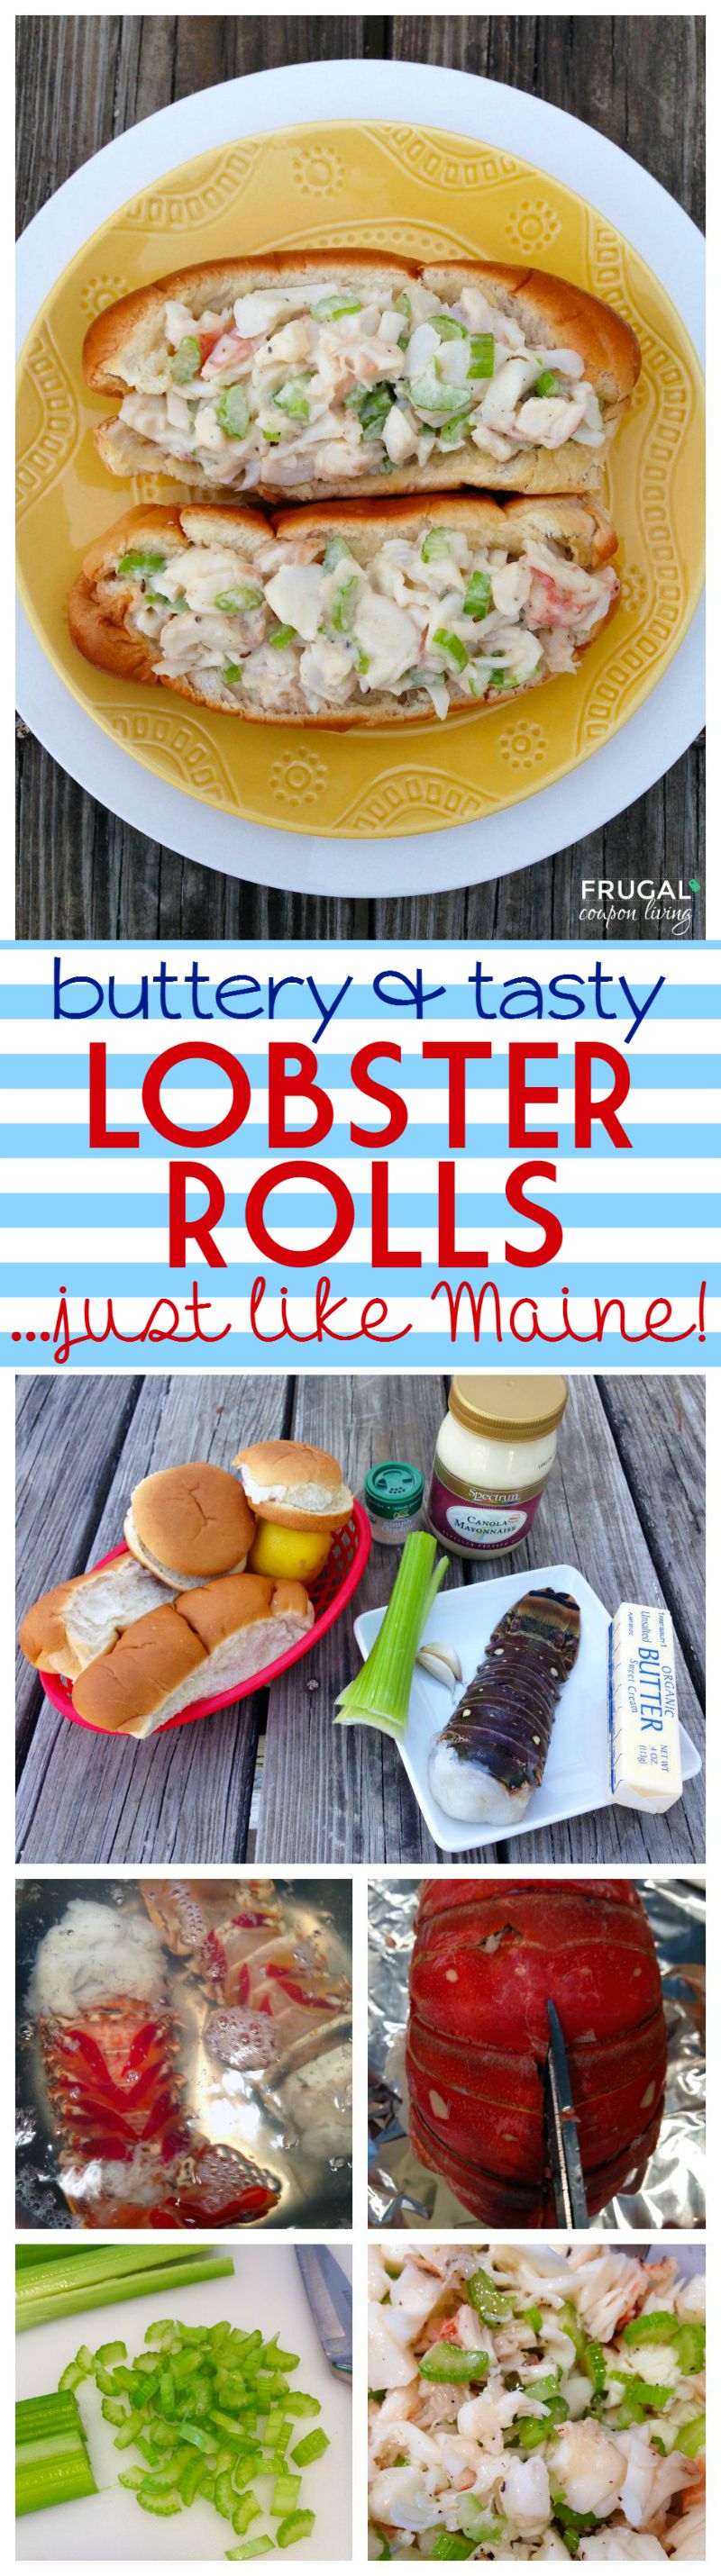 lobster-rolls-Collage-frugal-coupon-living-edited